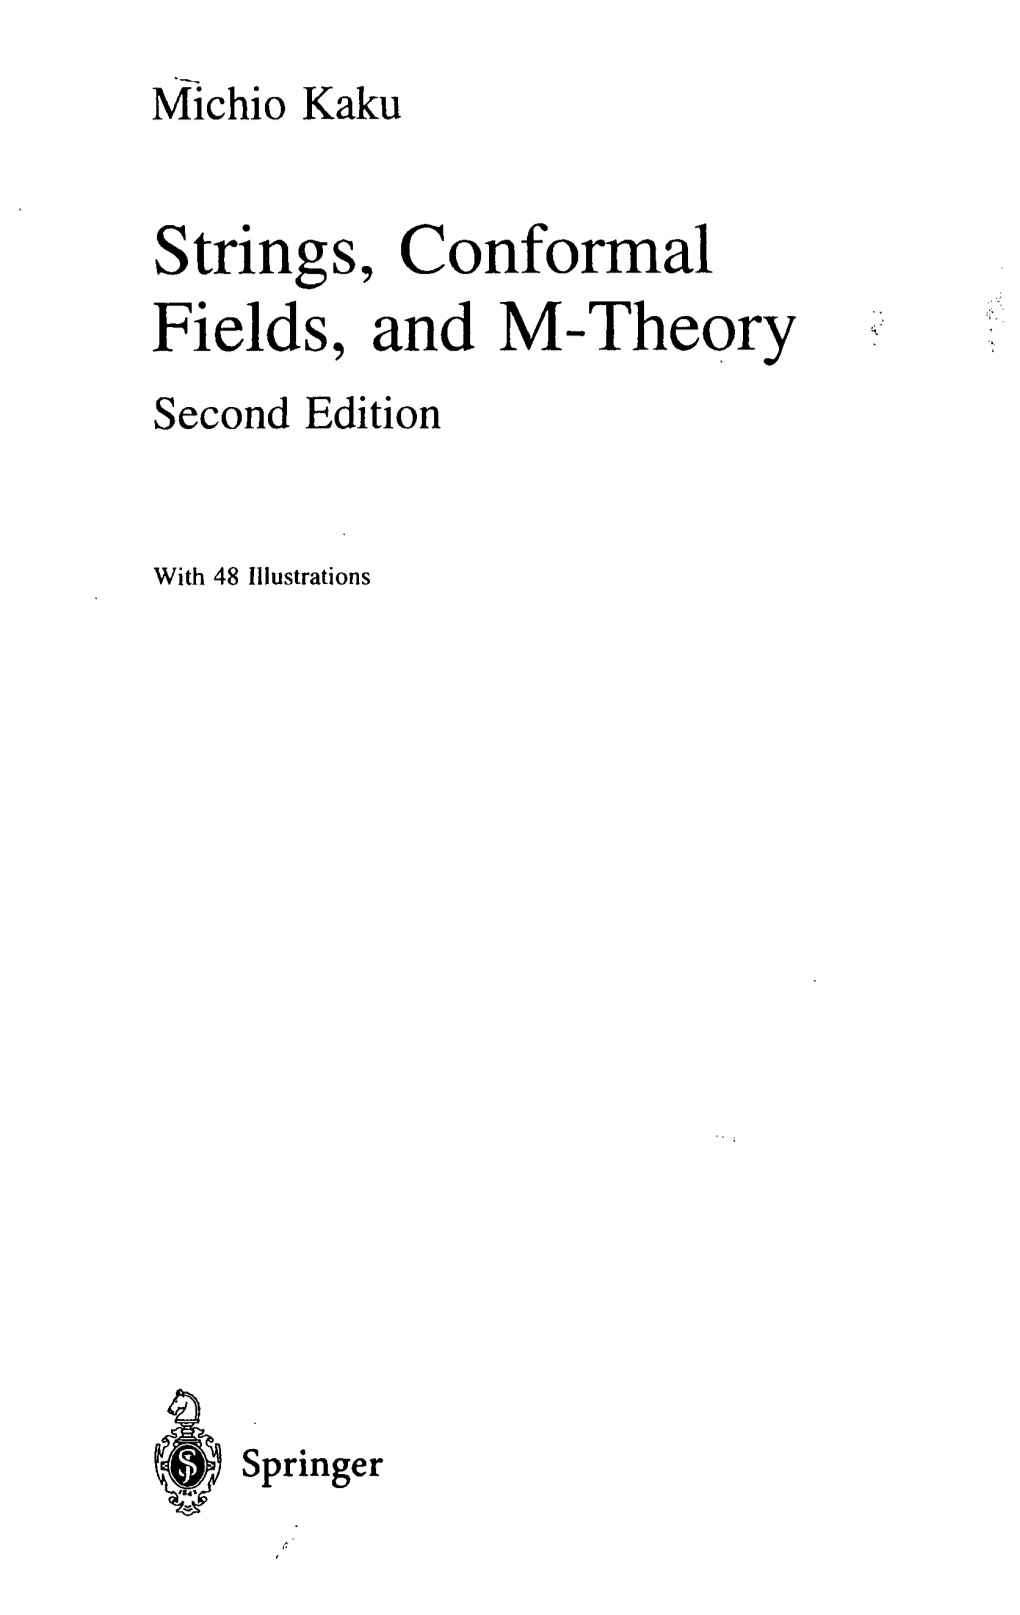 Strings, Conformal Fields, and M-Theory Second Edition